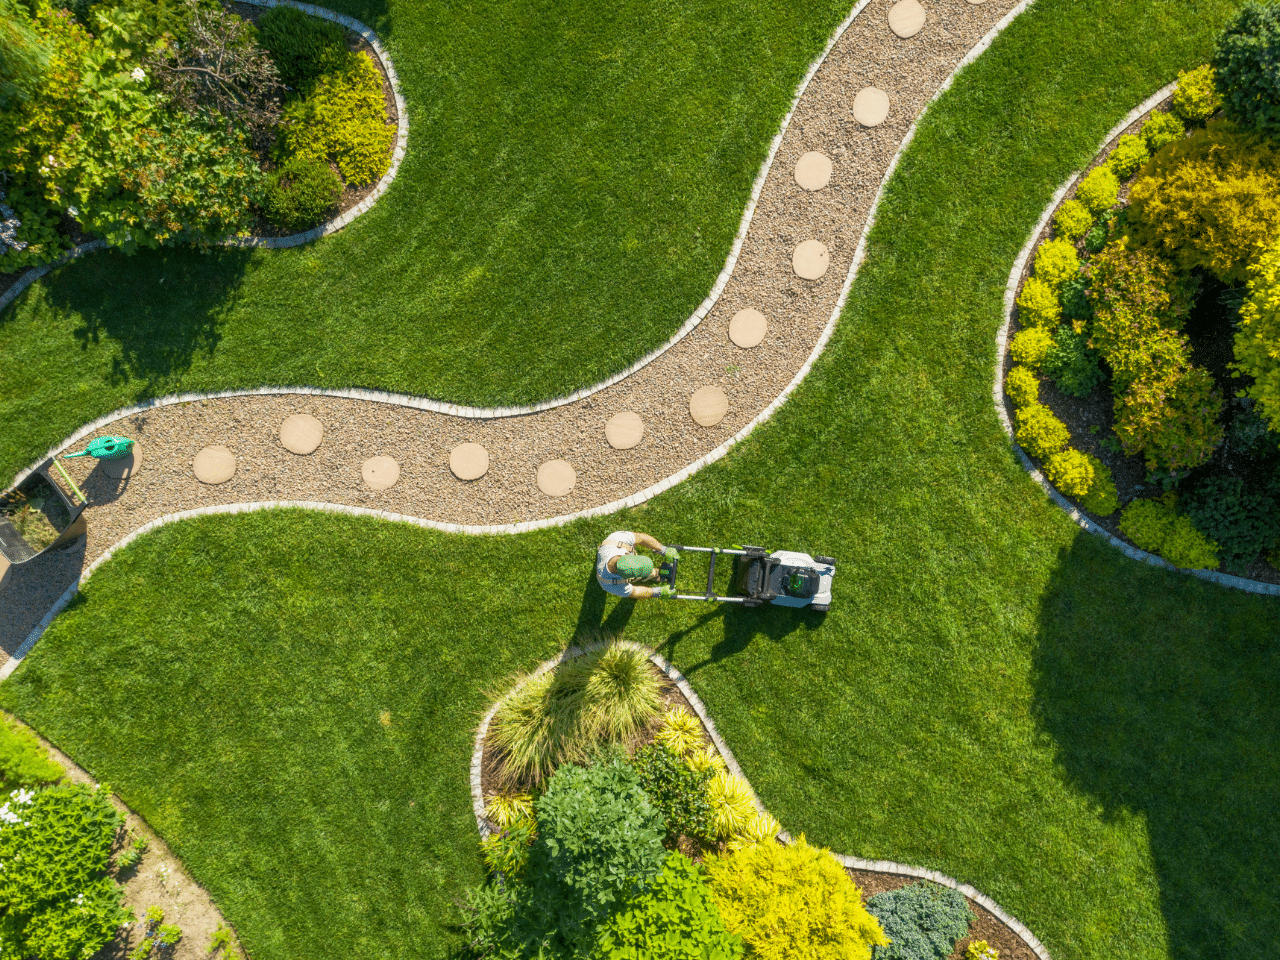 Landscaping Man in Yard with Pathway Top View